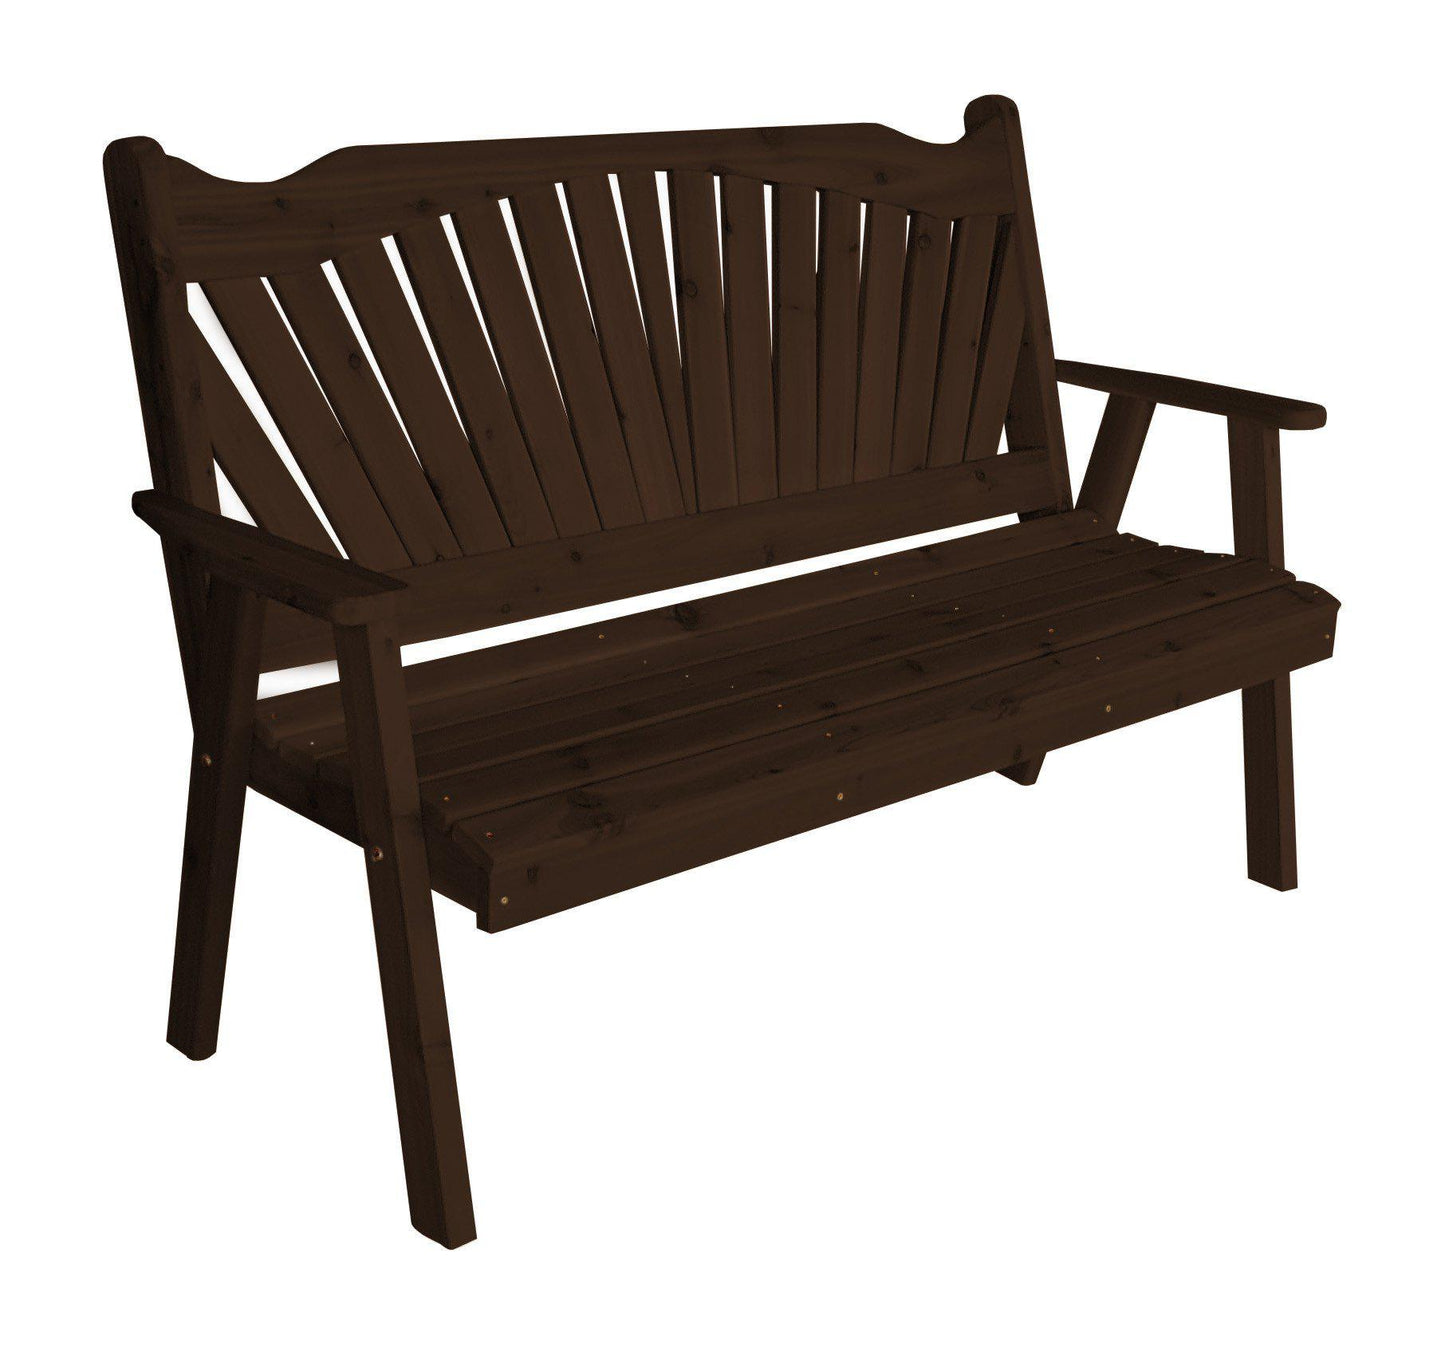 A&L Furniture Co. Western Red Cedar 4' Fanback Garden Bench - LEAD TIME TO SHIP 4 WEEKS OR LESS